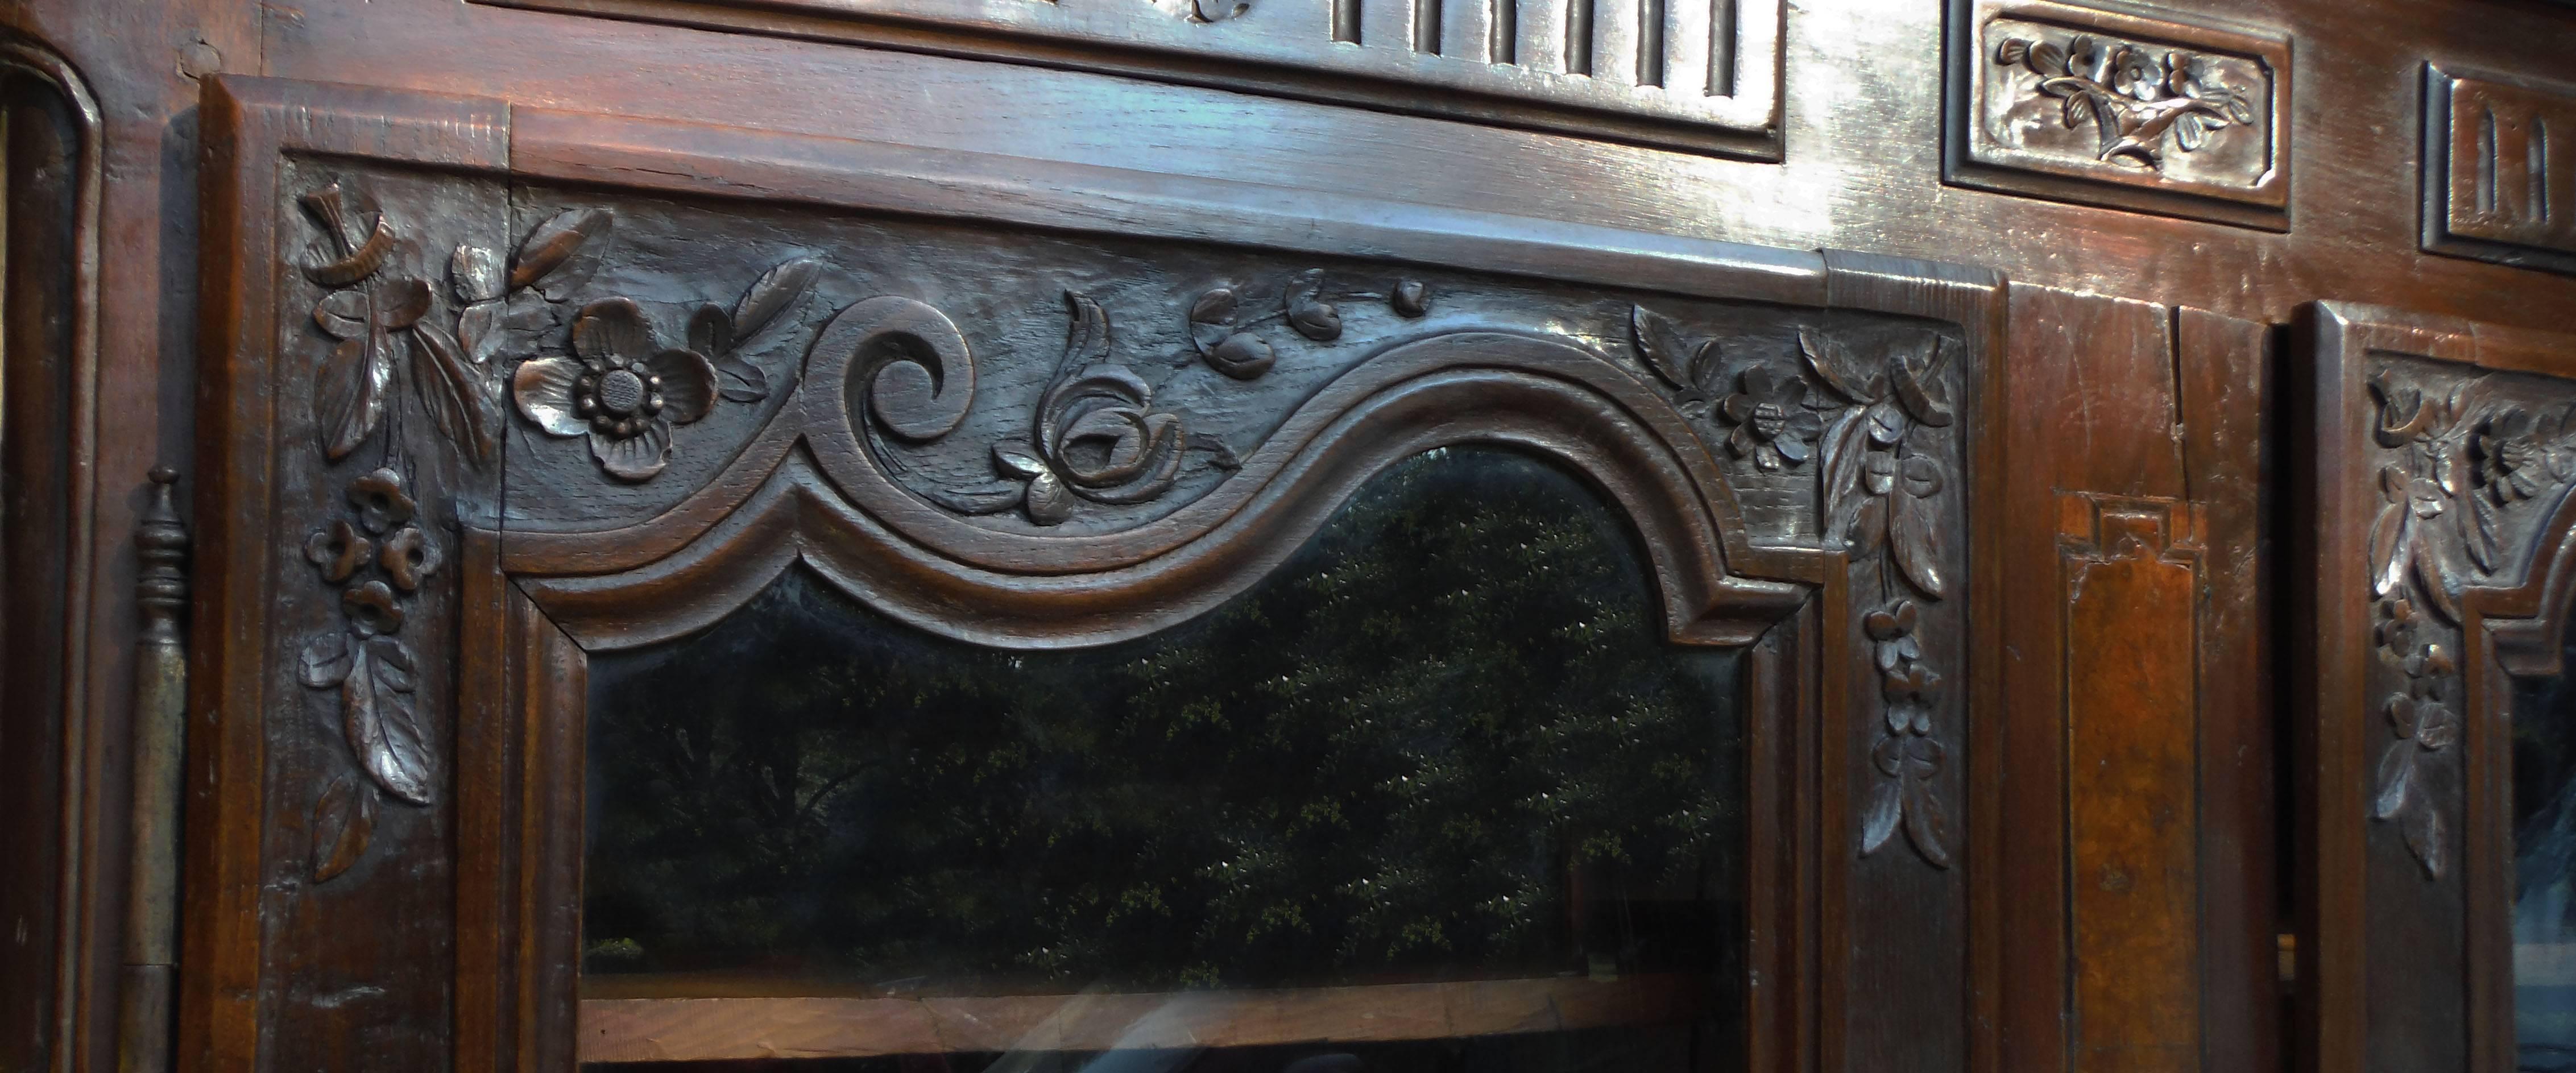 French Provincial wood carved armoire circa 1850, decorated with flowers.